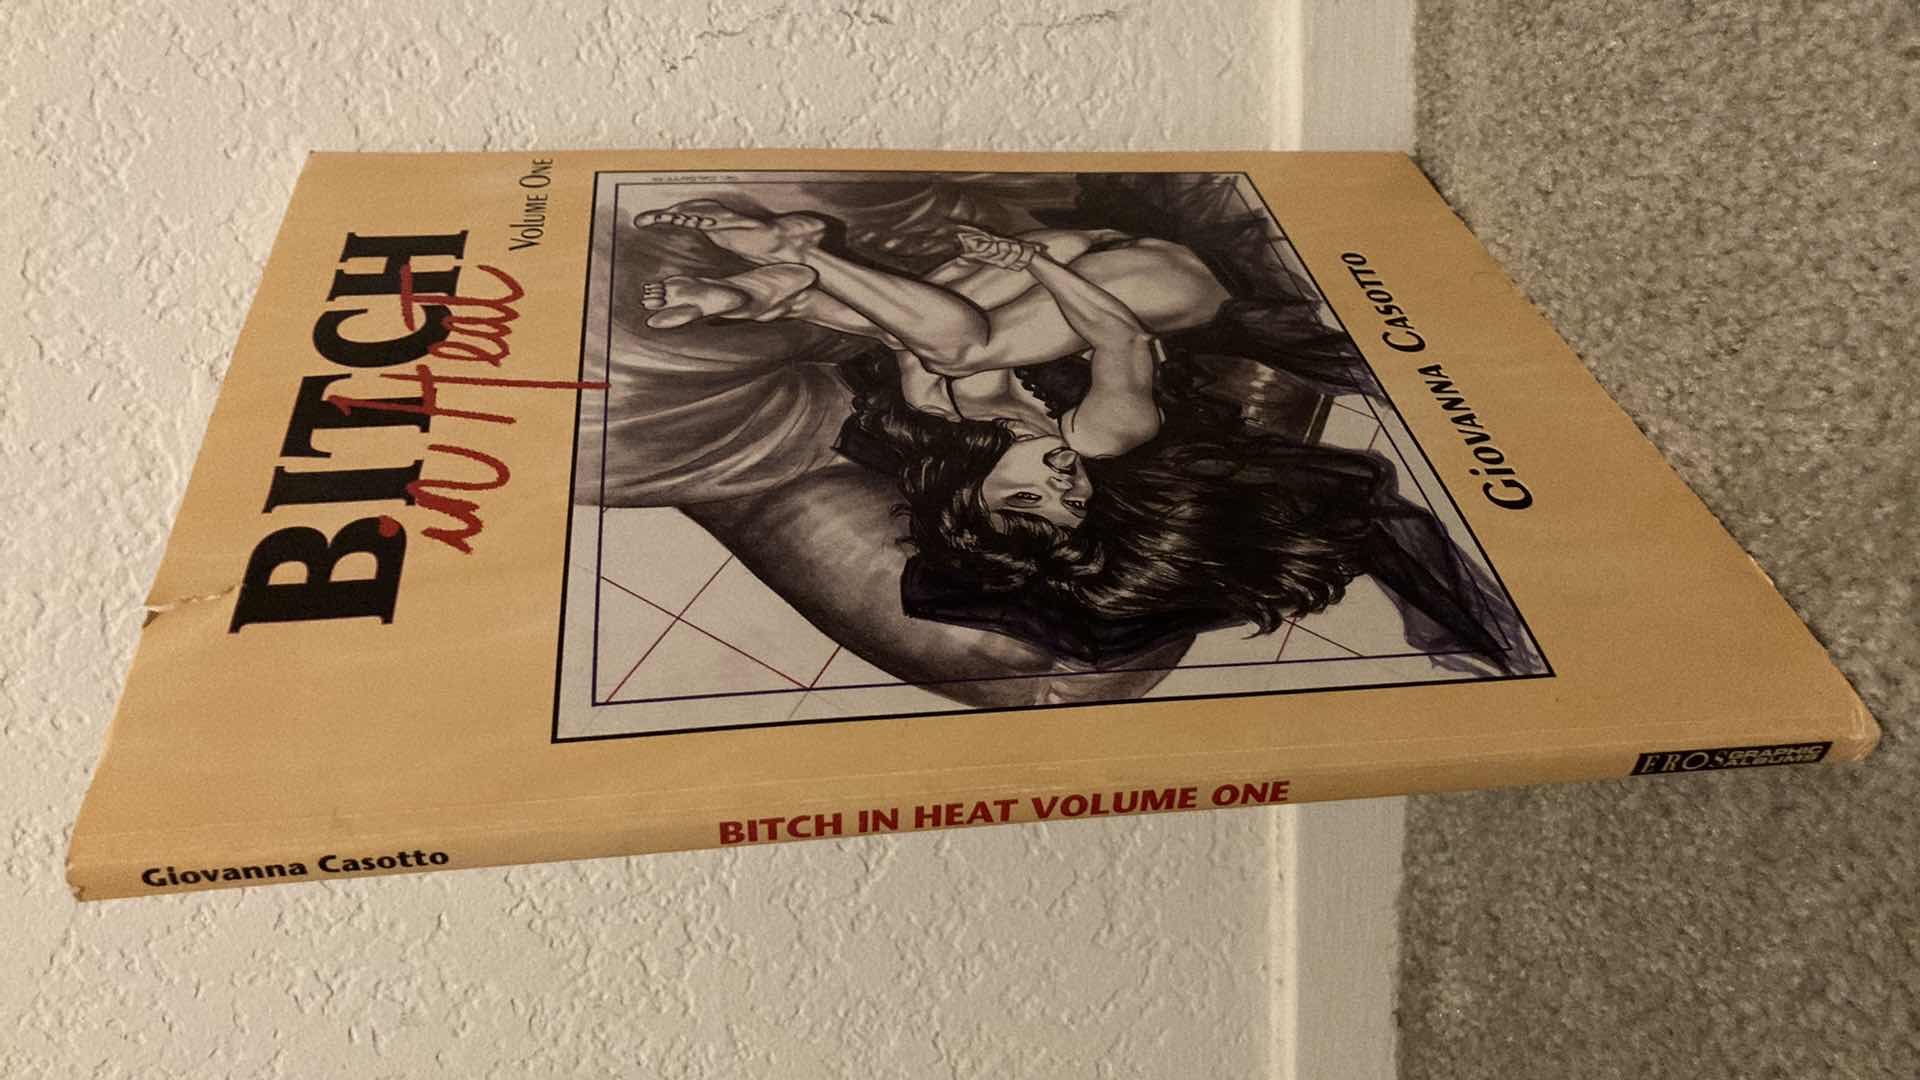 Photo 2 of BITCH IN HEAT VOLUME 1 PAPERBACK GRAPHIC NOVEL BY GIOVANNA CASOTTO